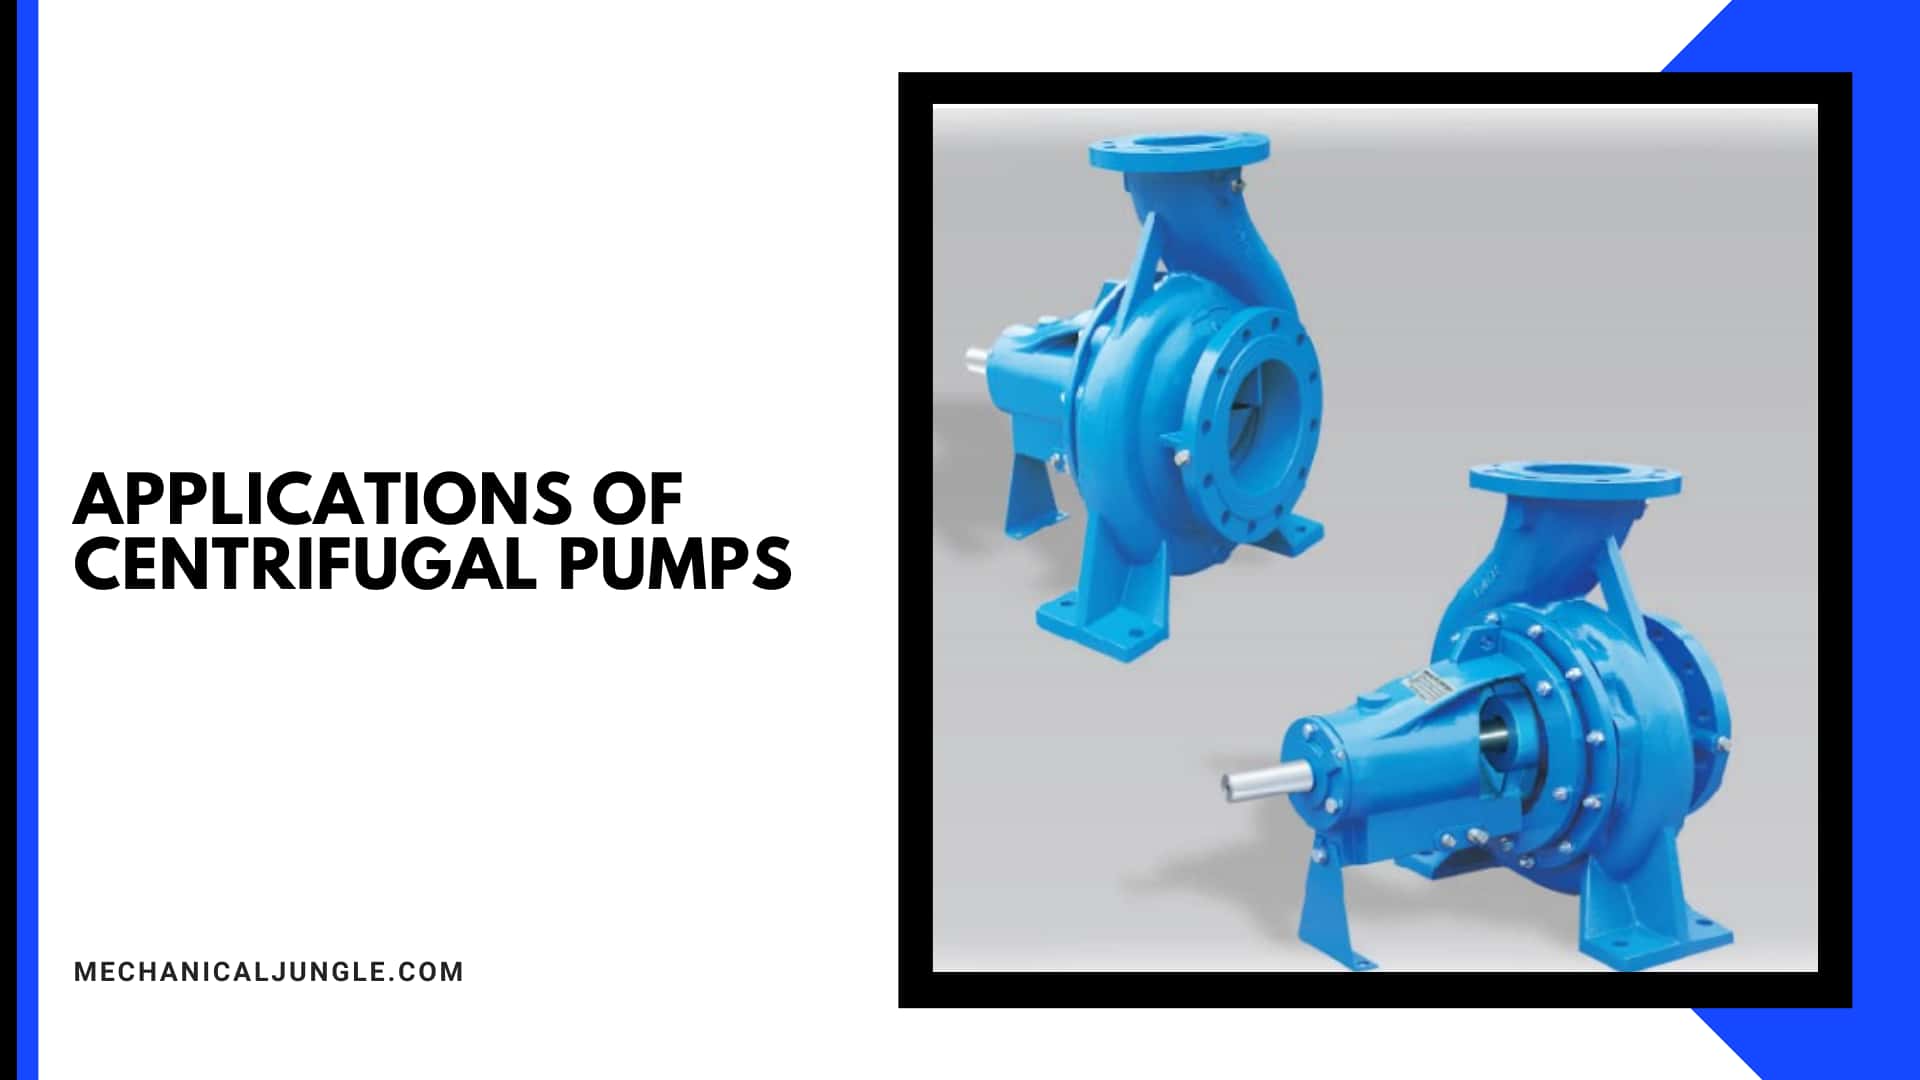 Applications of Centrifugal Pumps